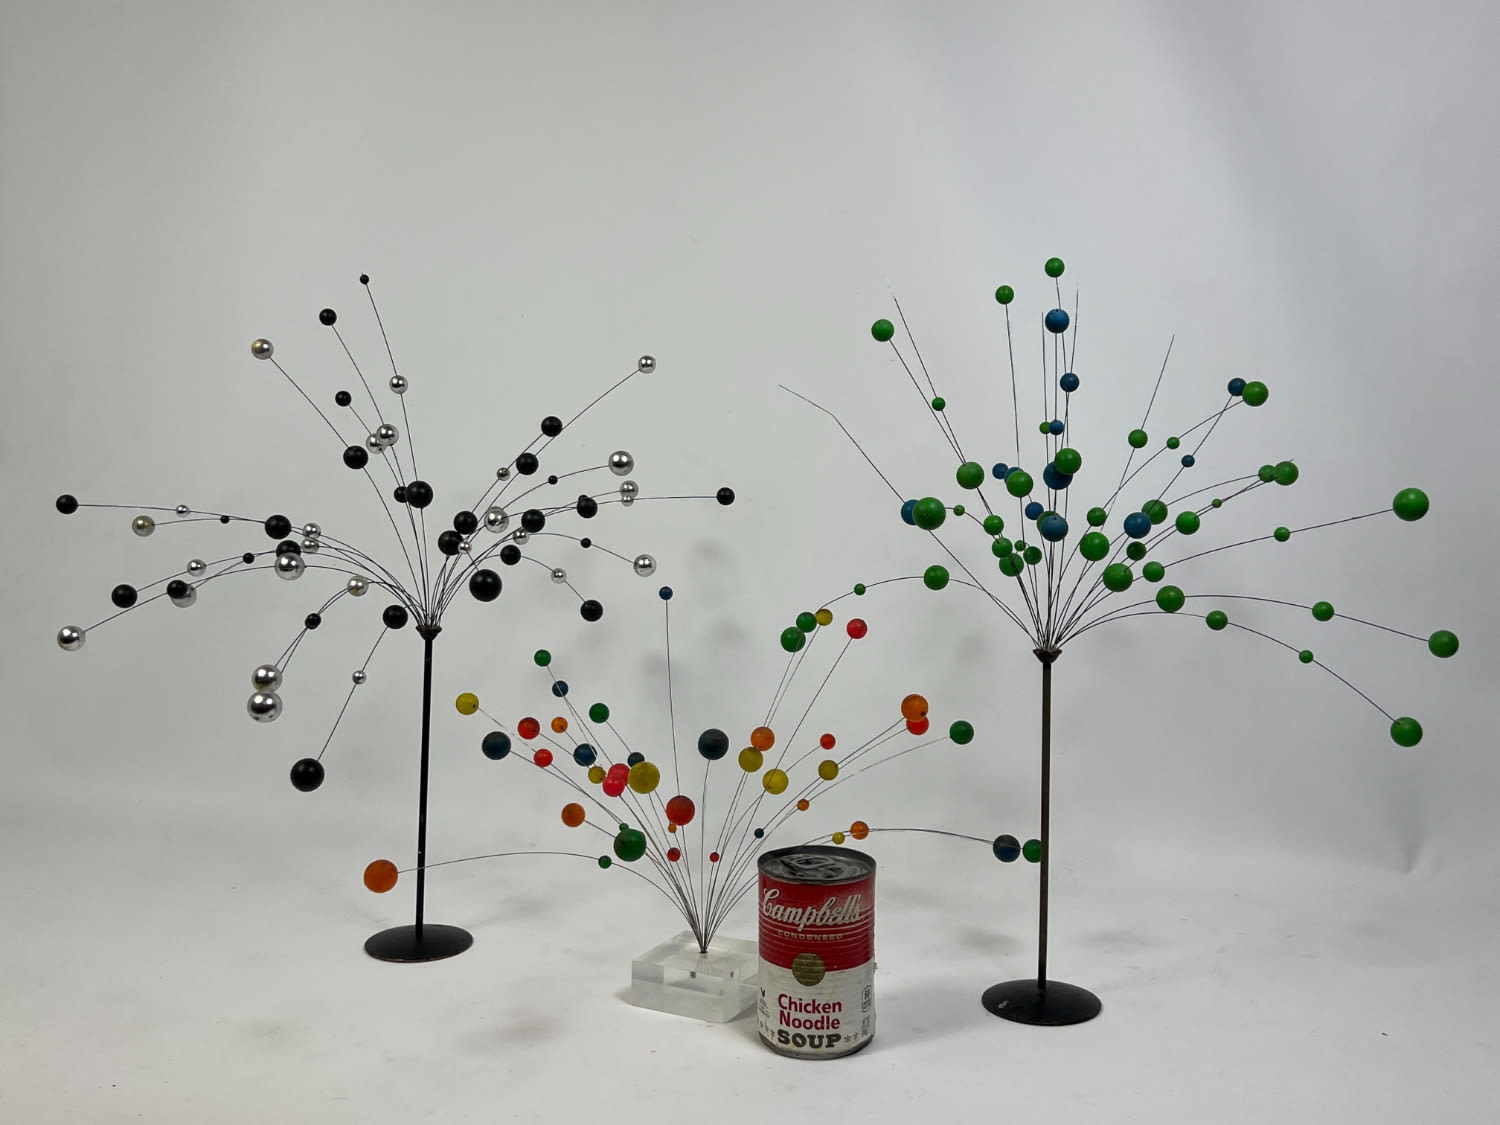 Artwork by Laurids Lonborg, 3pc LAURIDS LONBORG Kinetic Ball Sculptures. Thin wires with suspended, Made of black metal